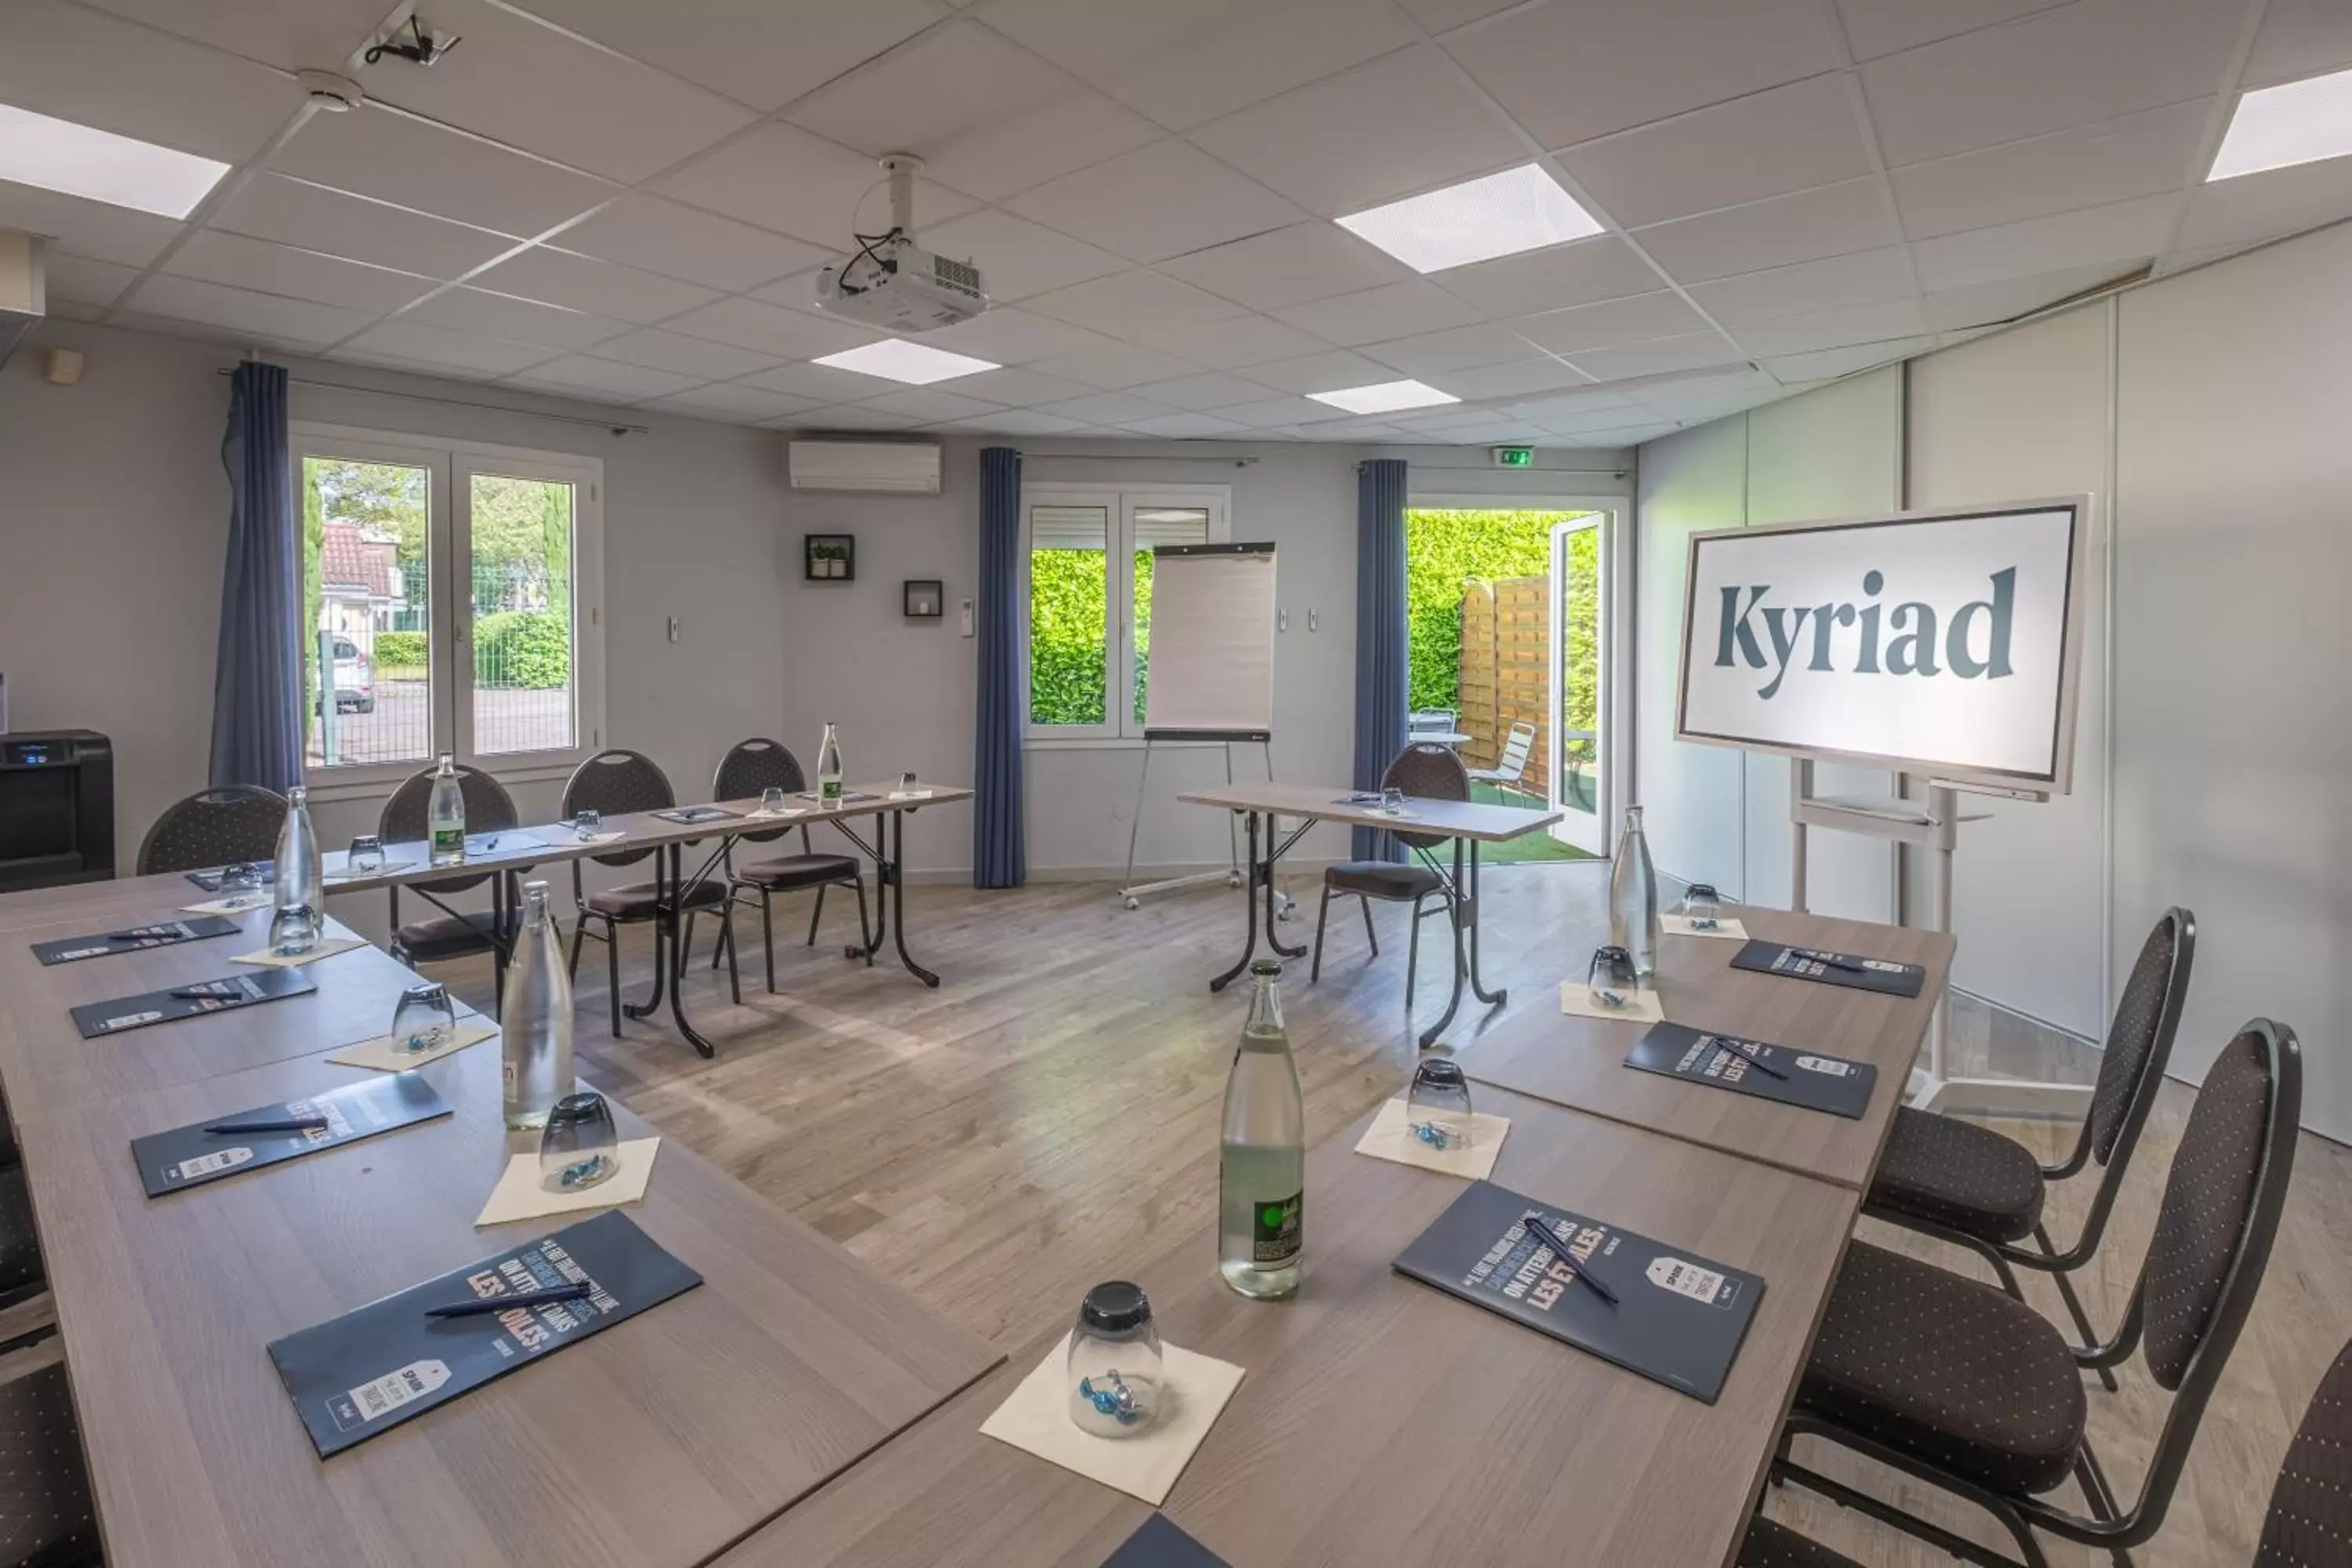 Meeting/conference room in Kyriad Lyon Est - Bron Eurexpo Le Cottage